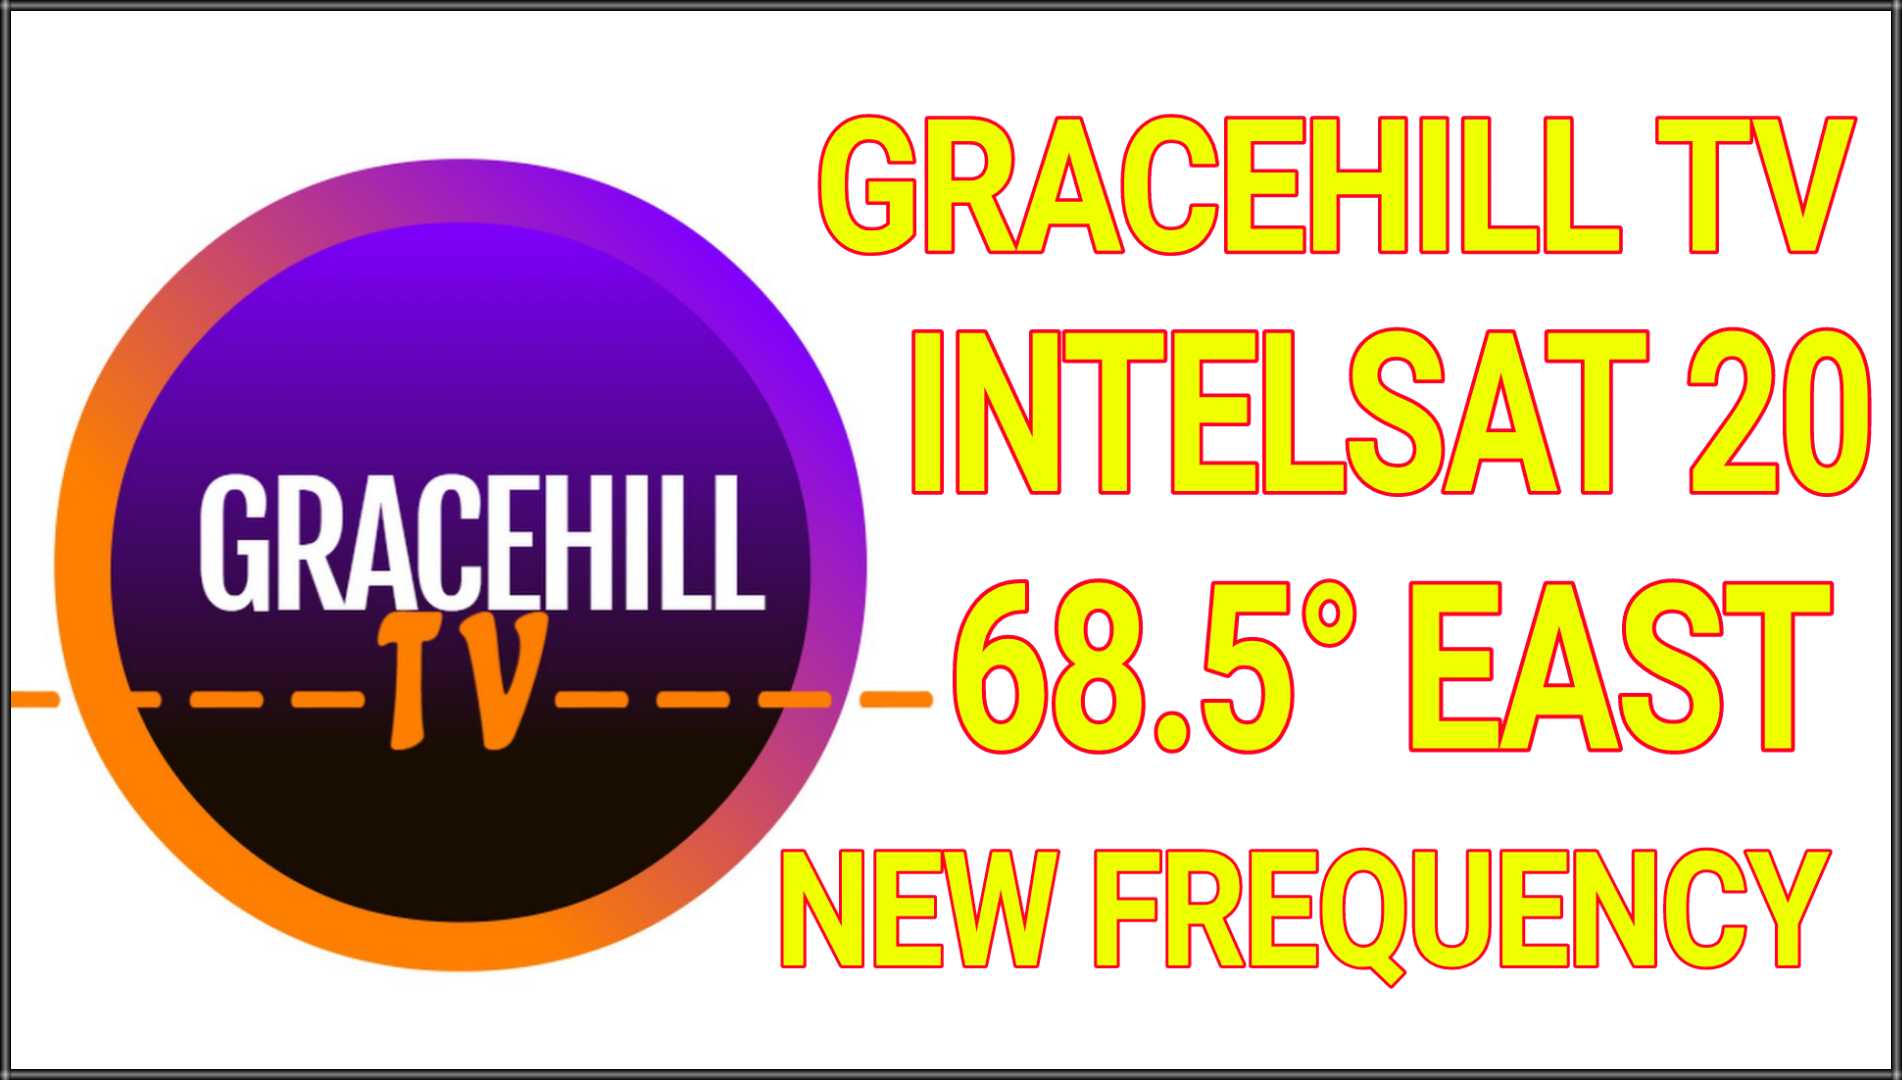 GRACEHILL TV Frequency